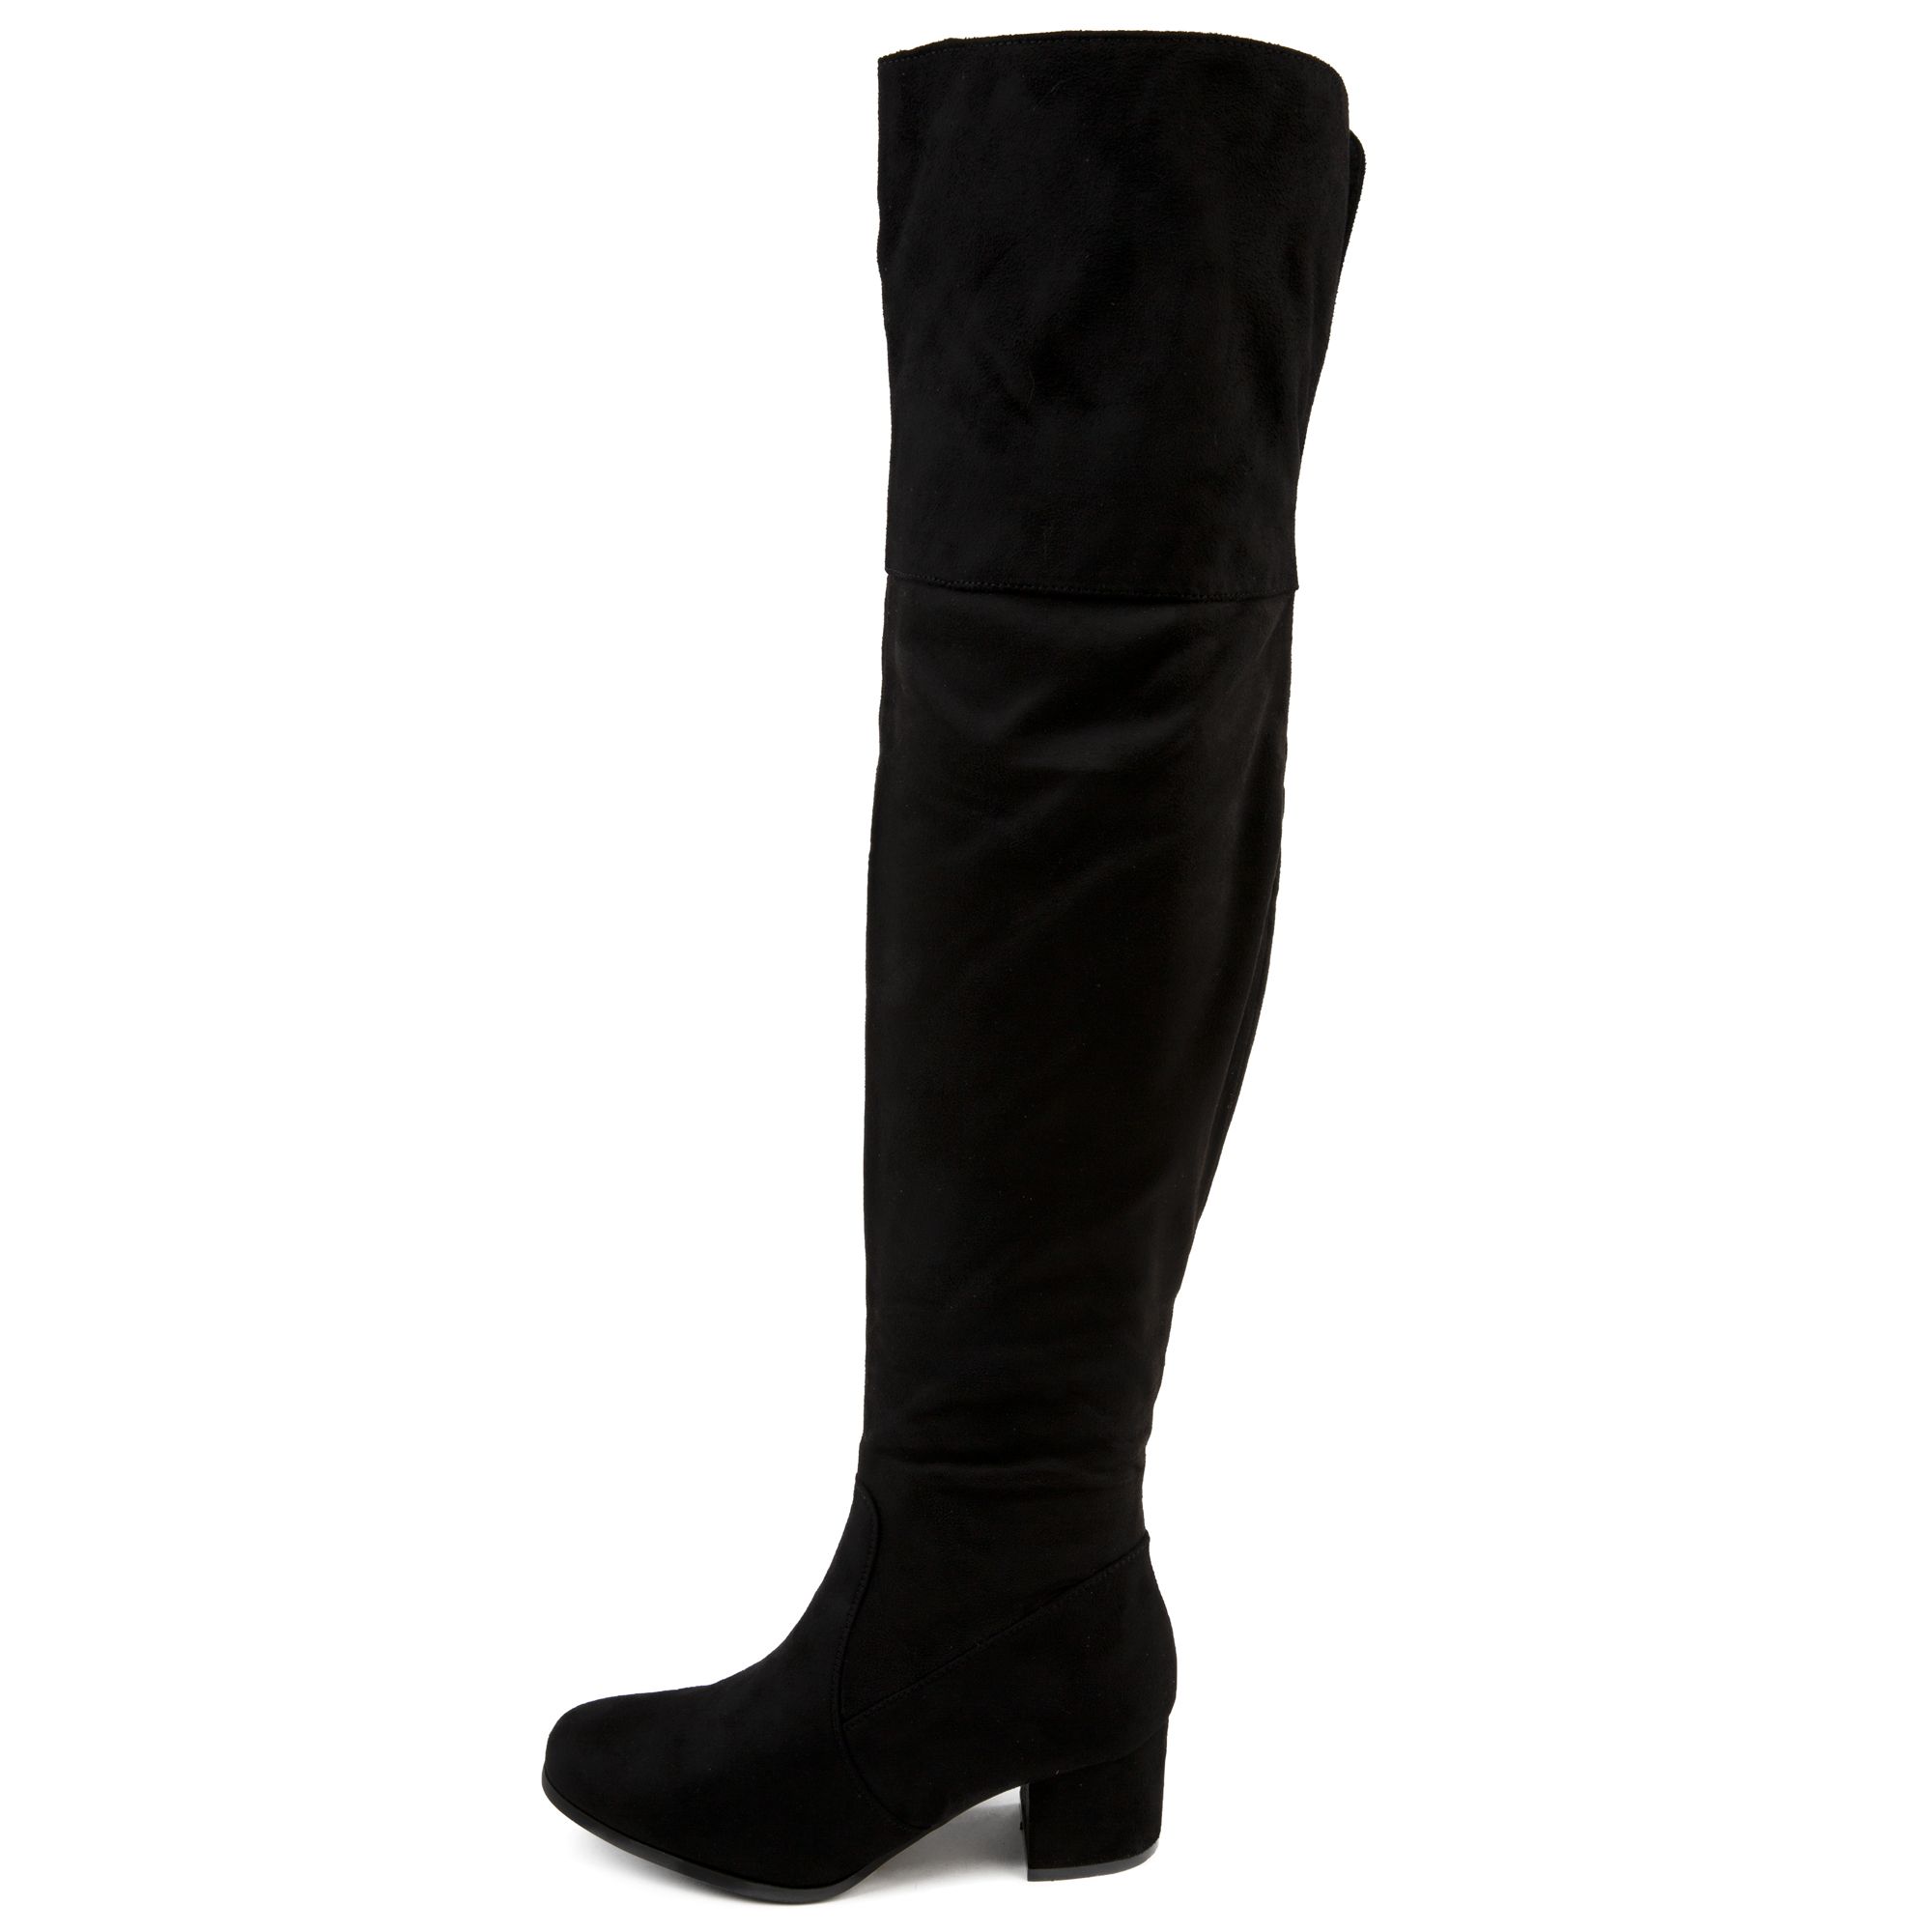 TWIN TIGER FOOTWEAR Linden-01 Over The Knee Boots LINDEN-01OK-BLK - Shiekh